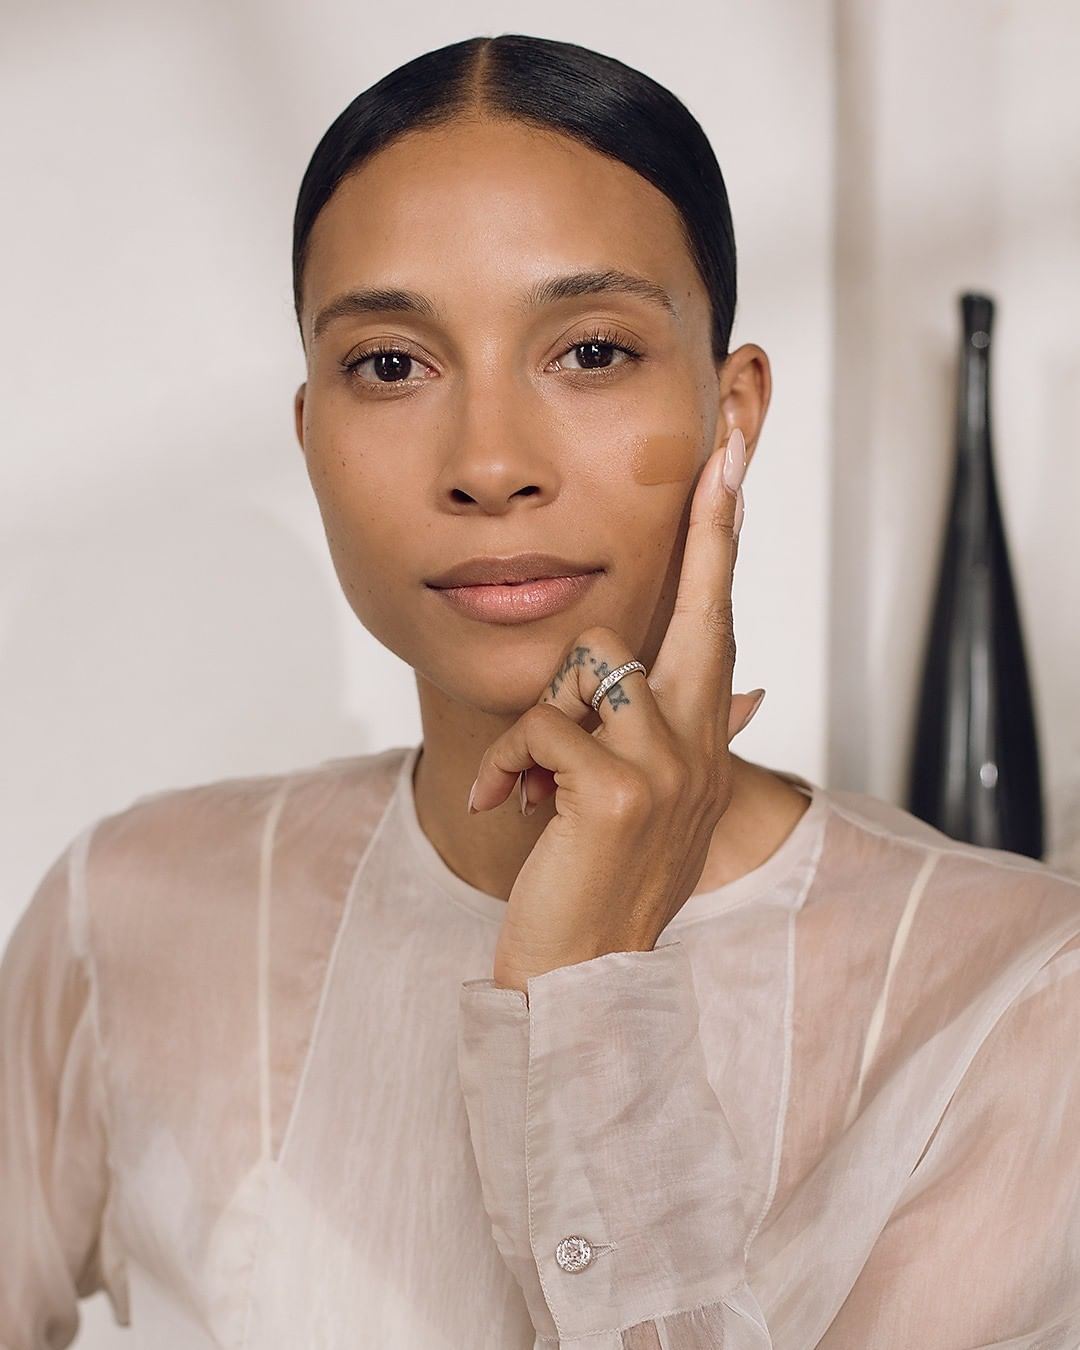 Armani beauty - A radiant "no makeup makeup" look. @TyLynnNguyen wears ultra-lightweight, breathable NEO NUDE FOUNDATION in shade 10 for a refreshed and moisturized complexion. 

 #ArmaniBeauty #Arman...